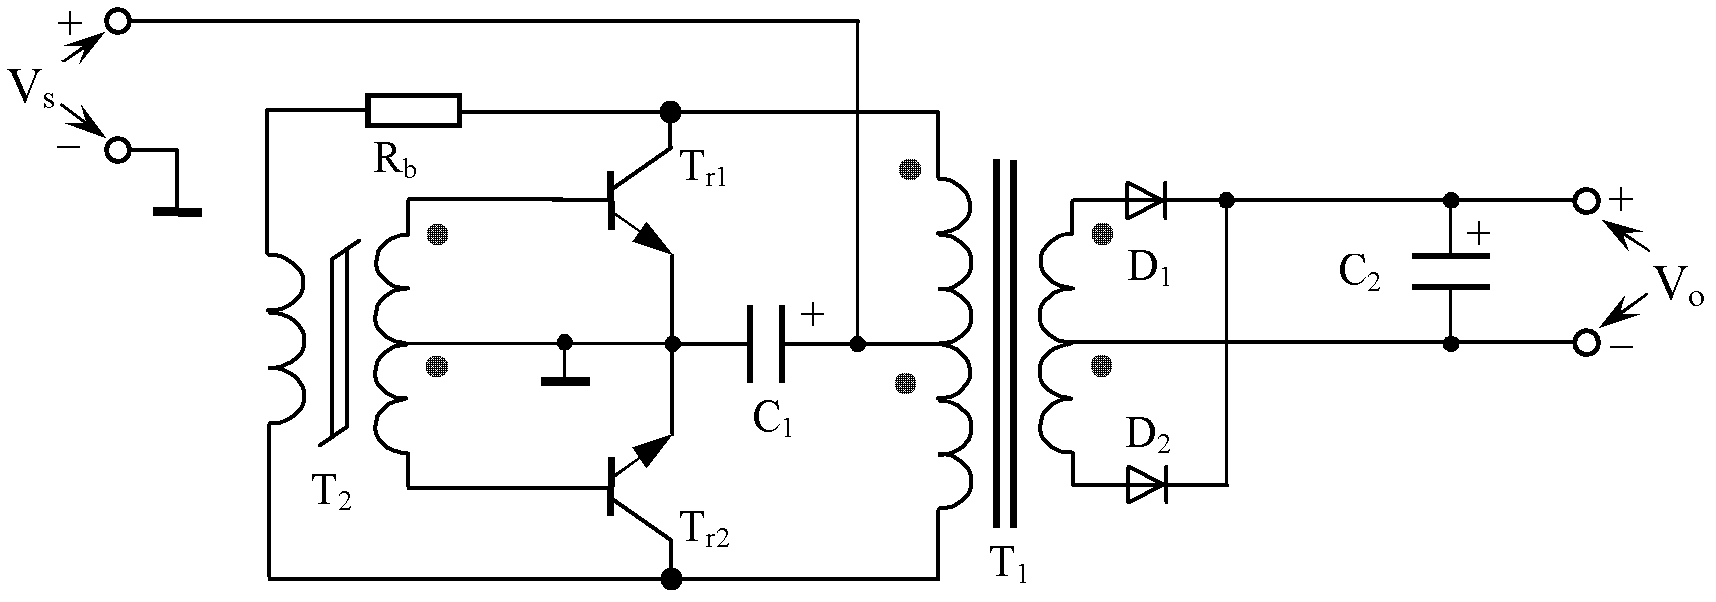 A self-excited push-pull converter